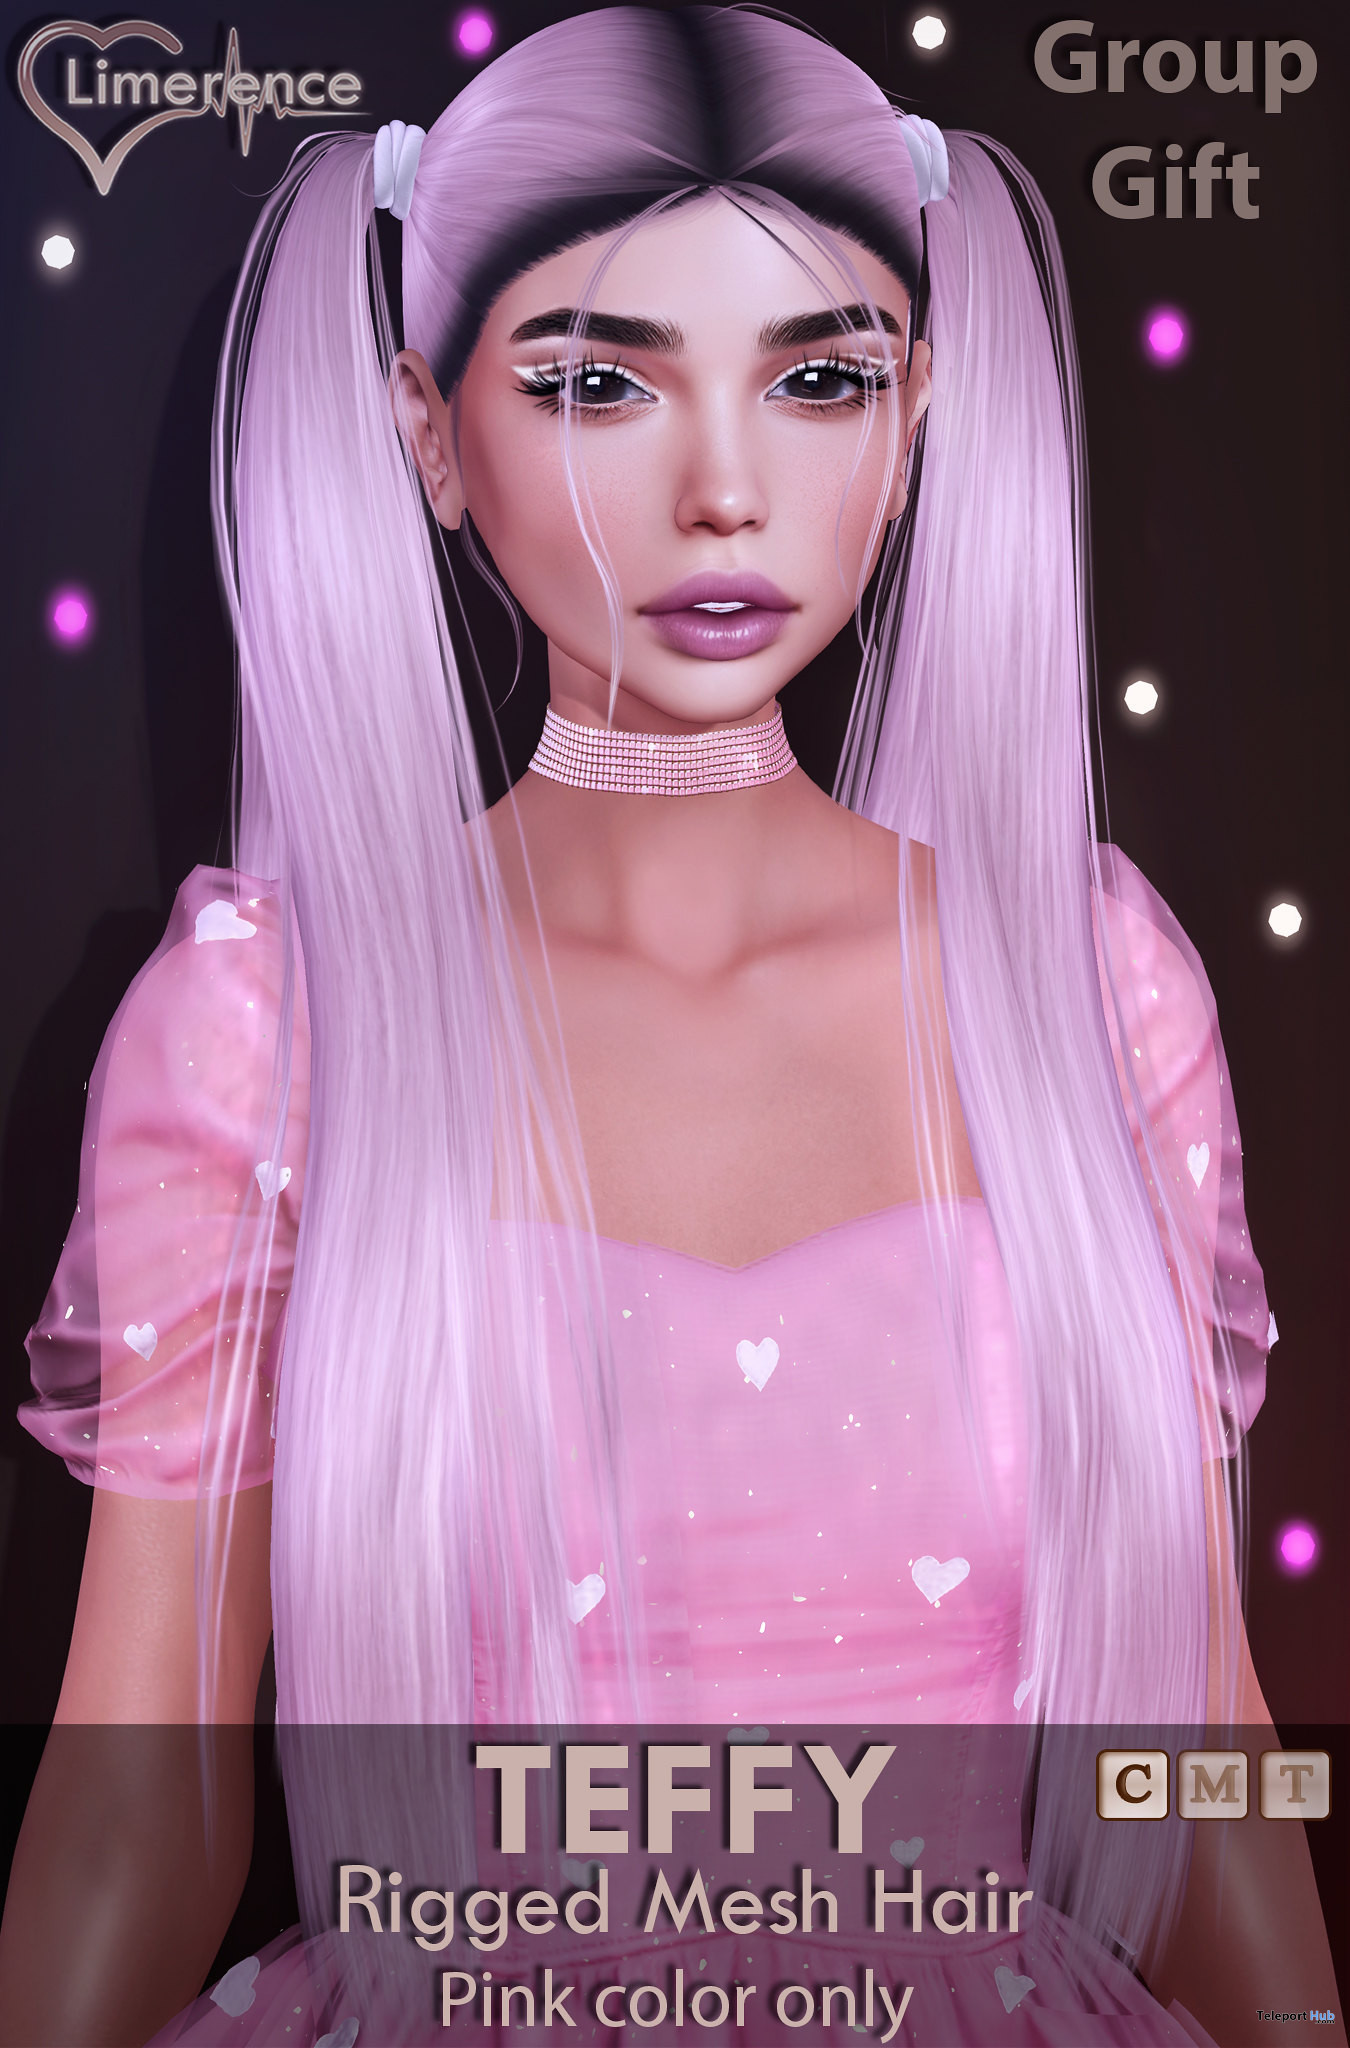 Teffy Hair Pink February 2022 Group Gift by Limerence - Teleport Hub - teleporthub.com